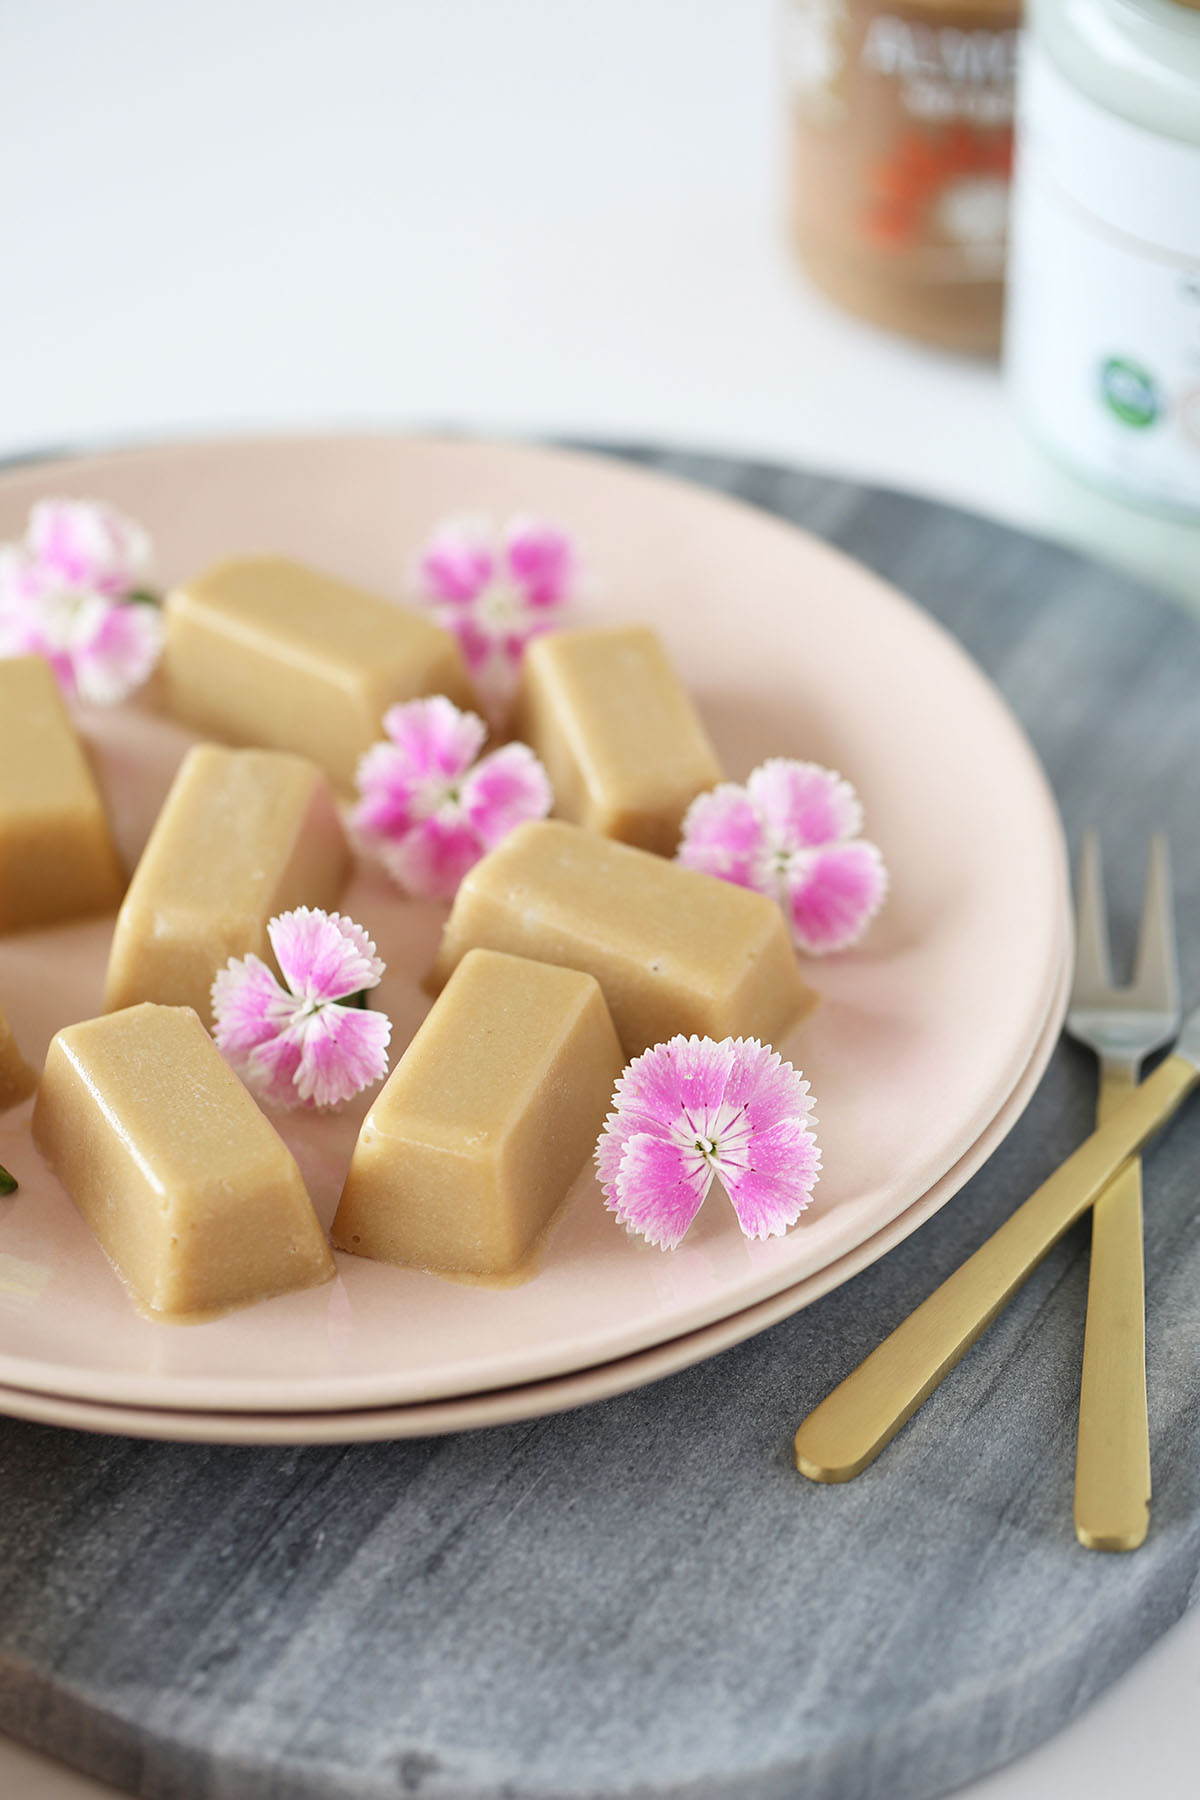 This delicious healthy fudge is melt in your mouth good, with 5 simple ingredients and no blender required. Vegan, dairy free & refined sugar free.